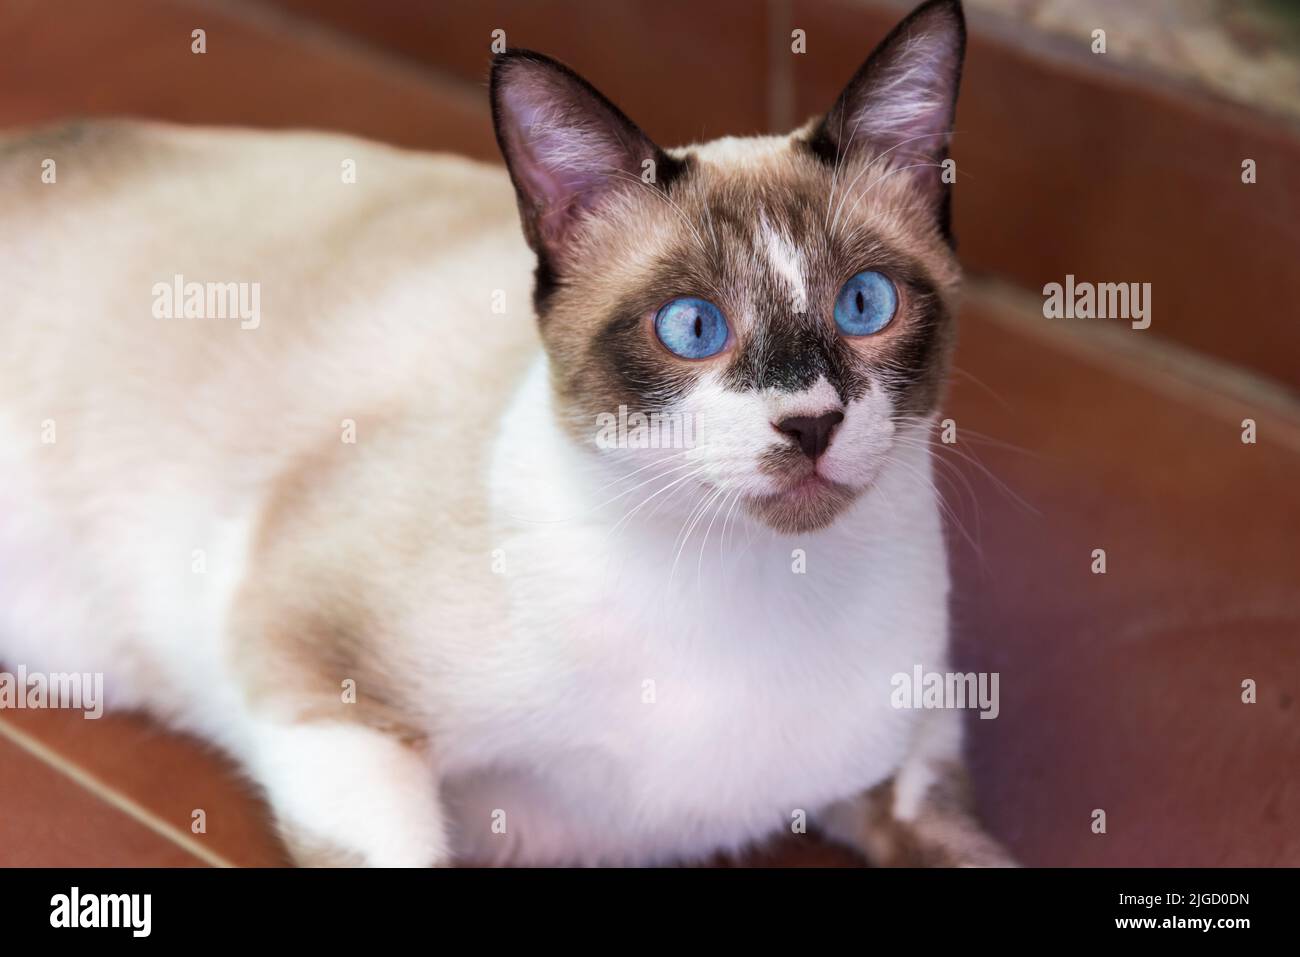 Siamese cat with blue eyes lying down and with its head up. Stock Photo